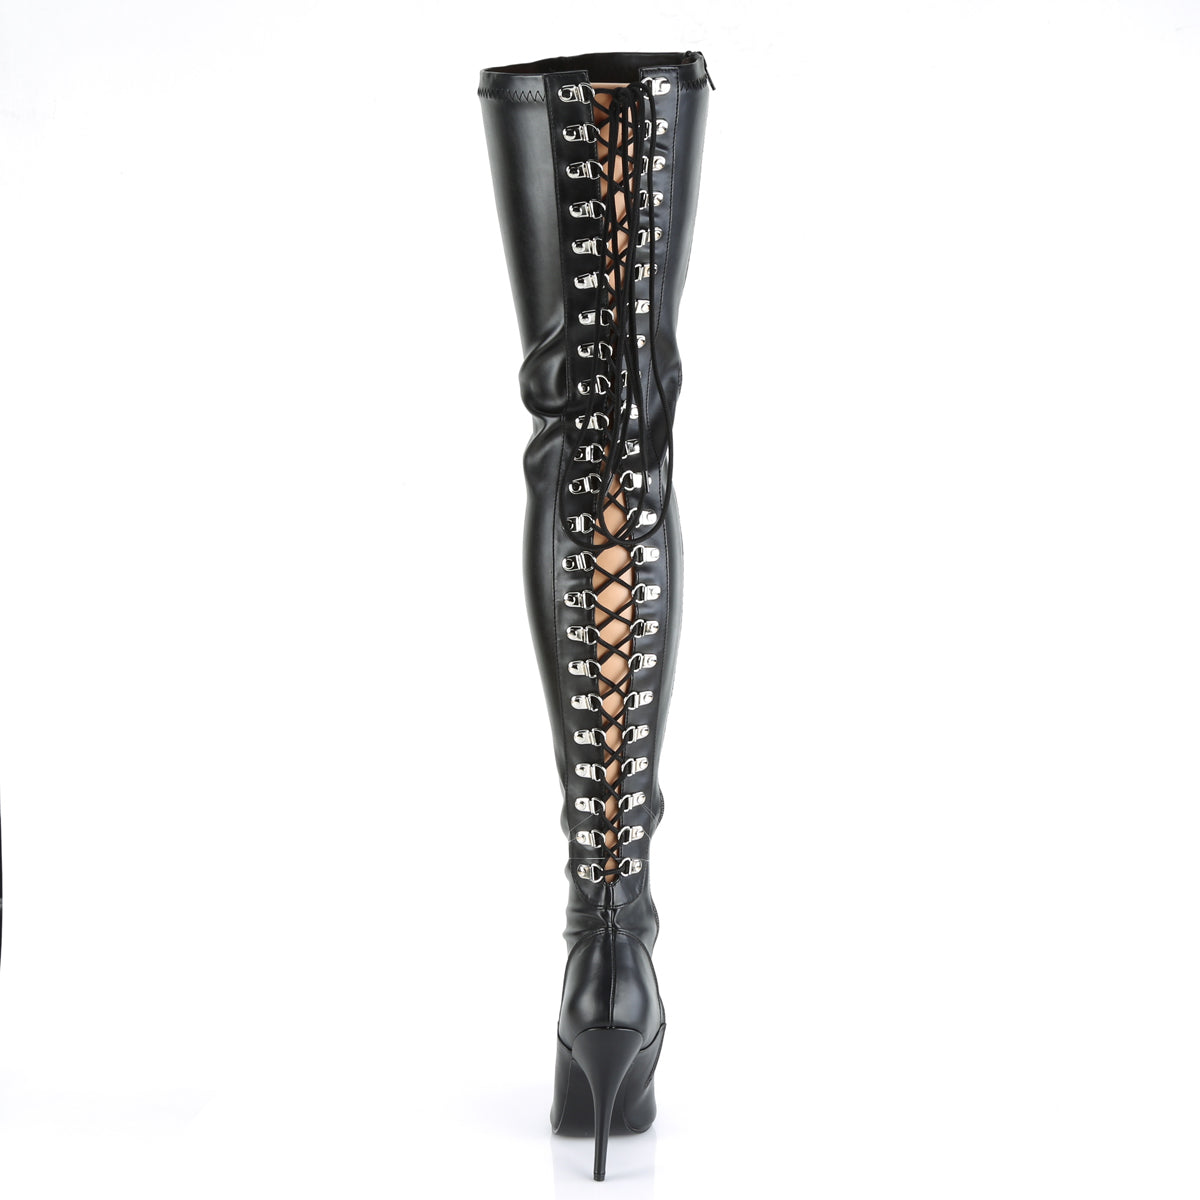 SEDUCE-3063 Black Stretch Faux Leather Thigh Boot Pleaser